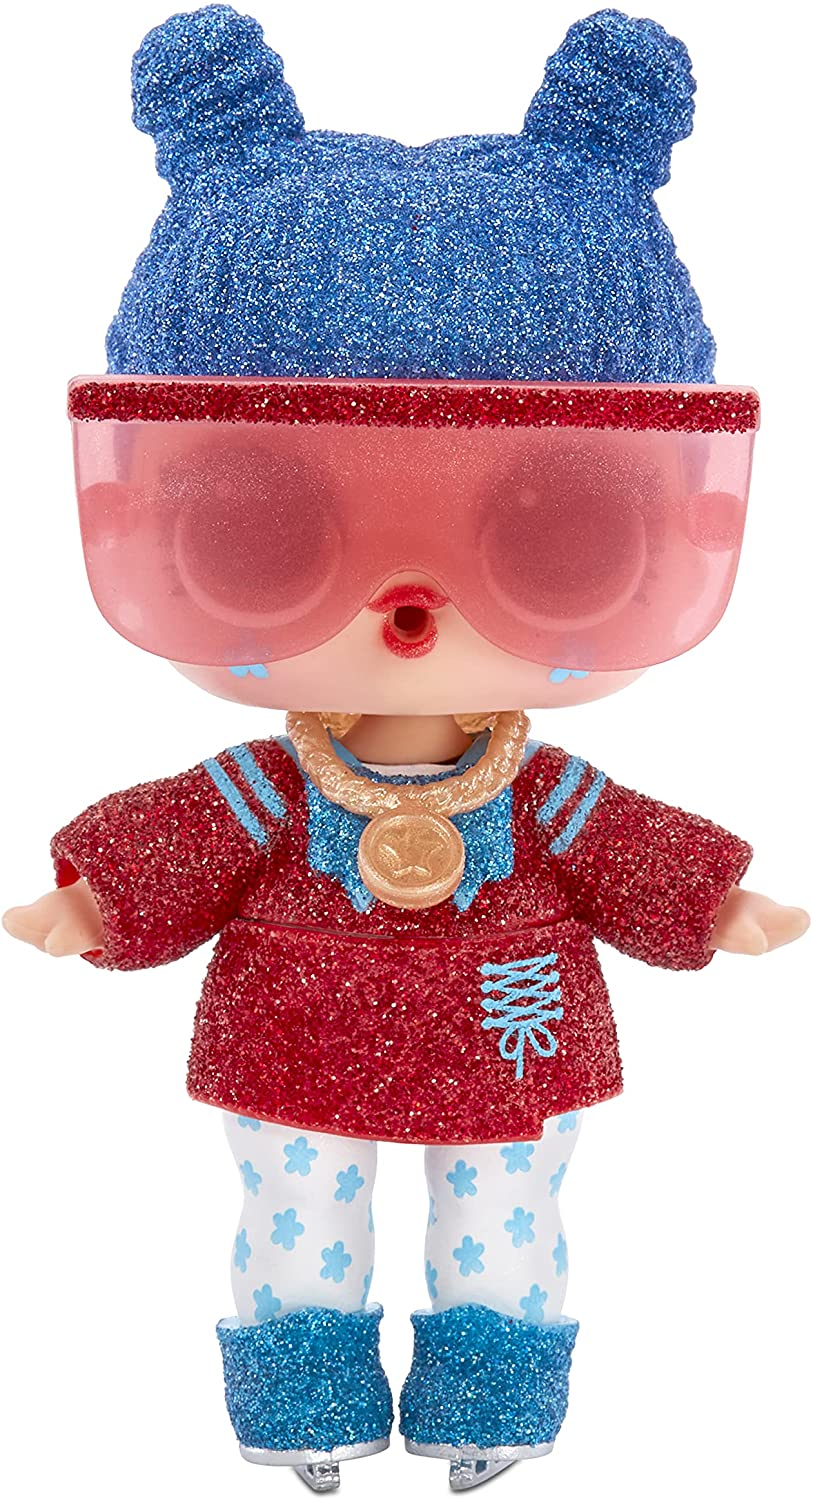 LOL Surprise All-Star Sports Series 5 Winter Games Sparkly Collectible Doll with 8 Surprises, Mix & Match Accessories,Toys for Girls and Boys Ages 4 5 6 7+ Years Old, (Styles May Vary),Multicolor